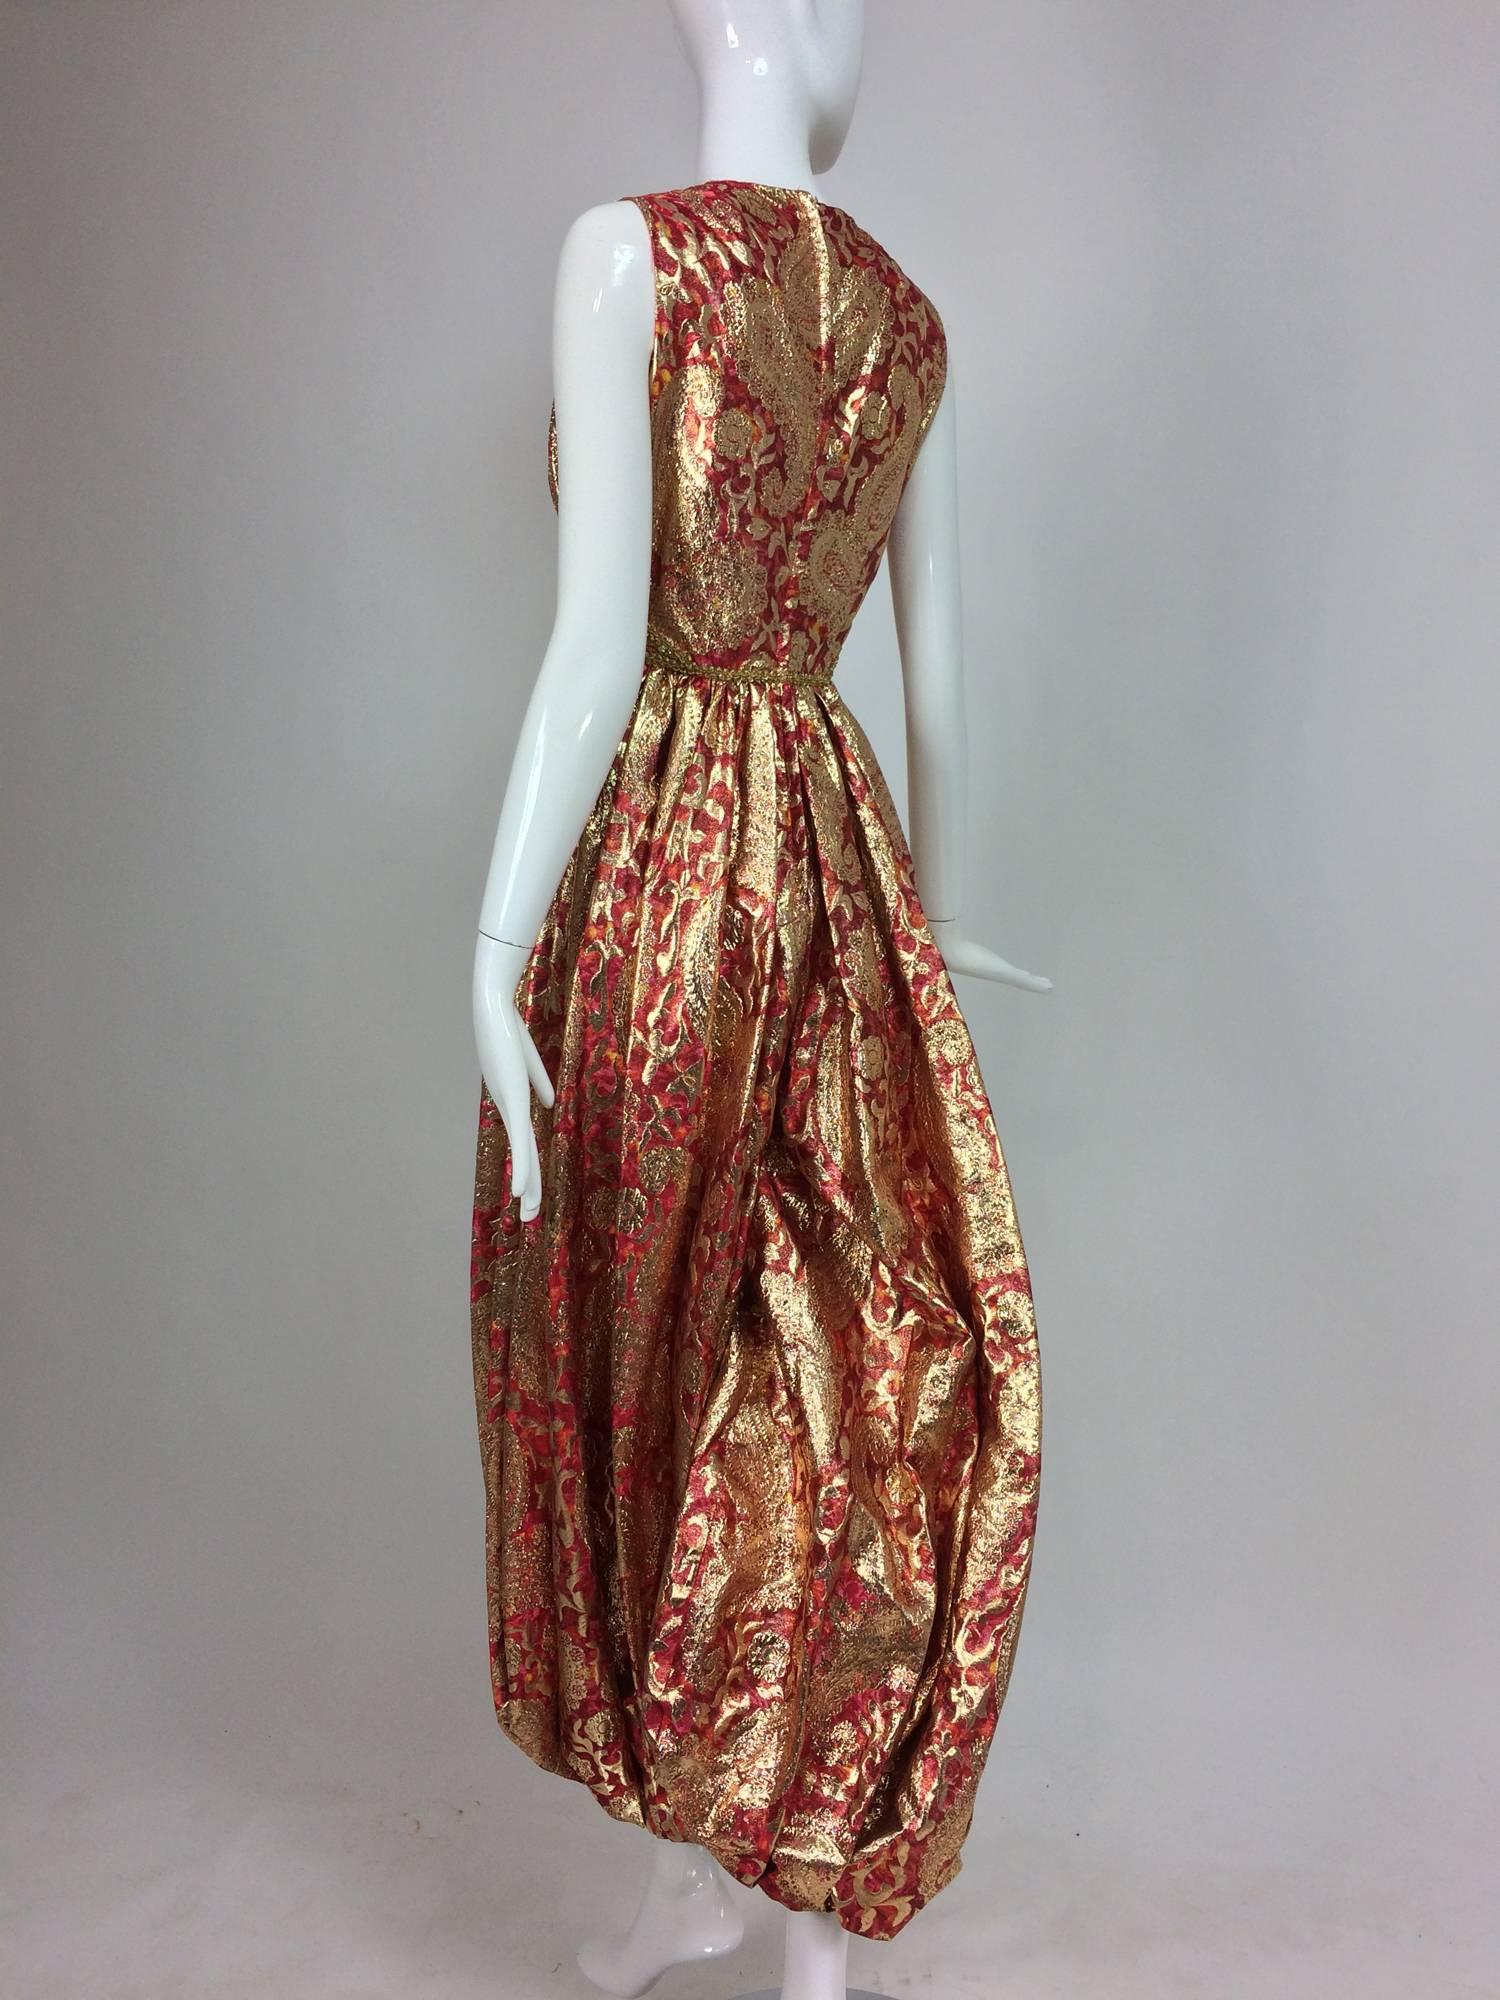 Women's Malcolm Starr jeweled coral and gold metallic lame harem jumpsuit 1970s